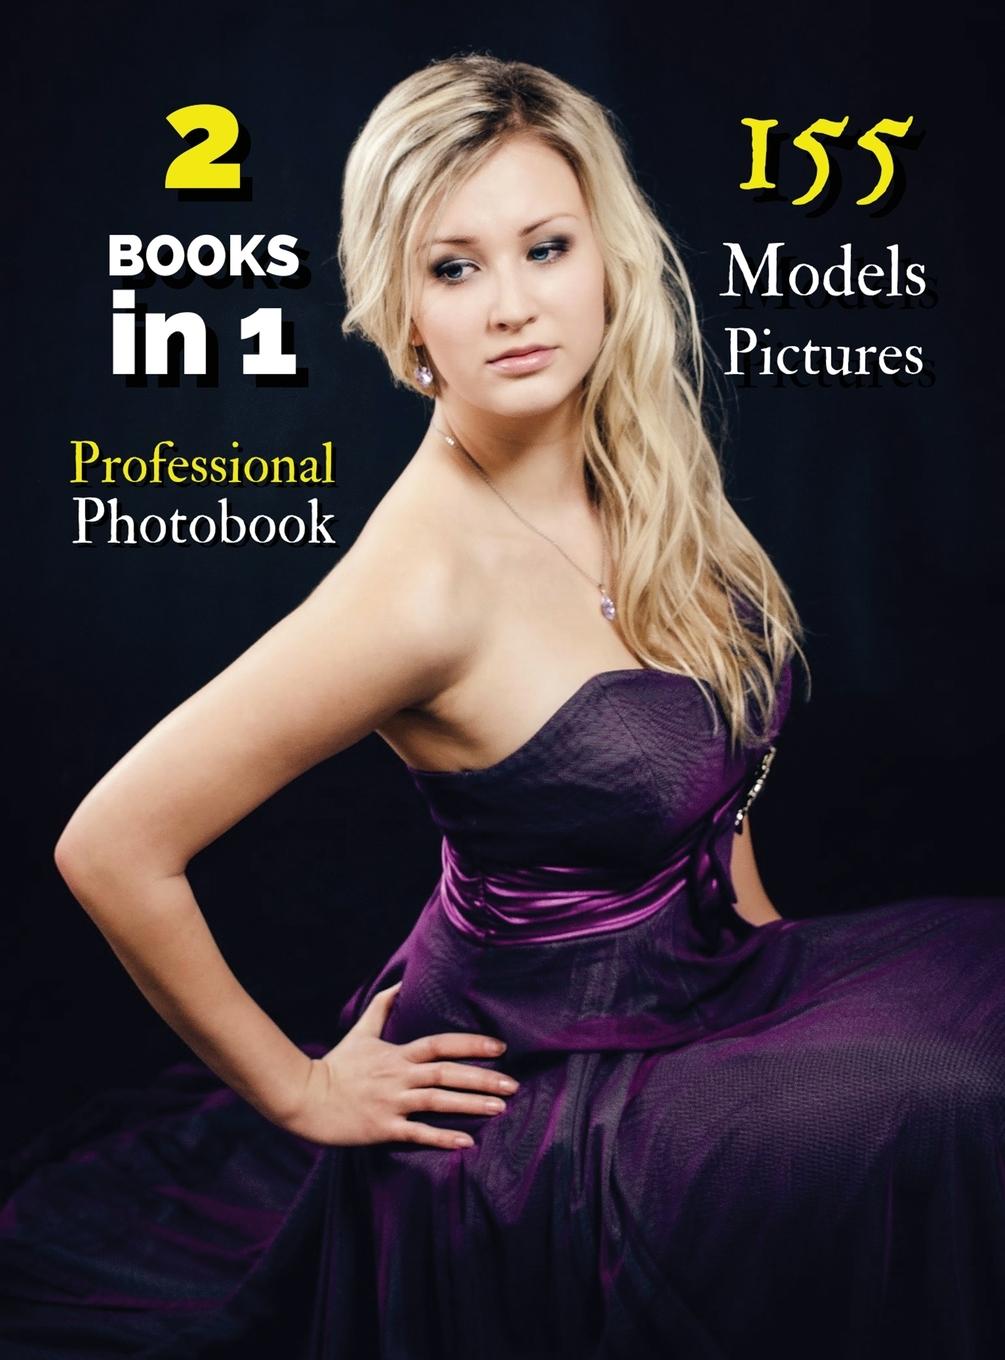 Carte [ 2 Books in 1 ] - Professional Photobook with 155 Models Pictures - This Book Contains 2 Photo Albums 